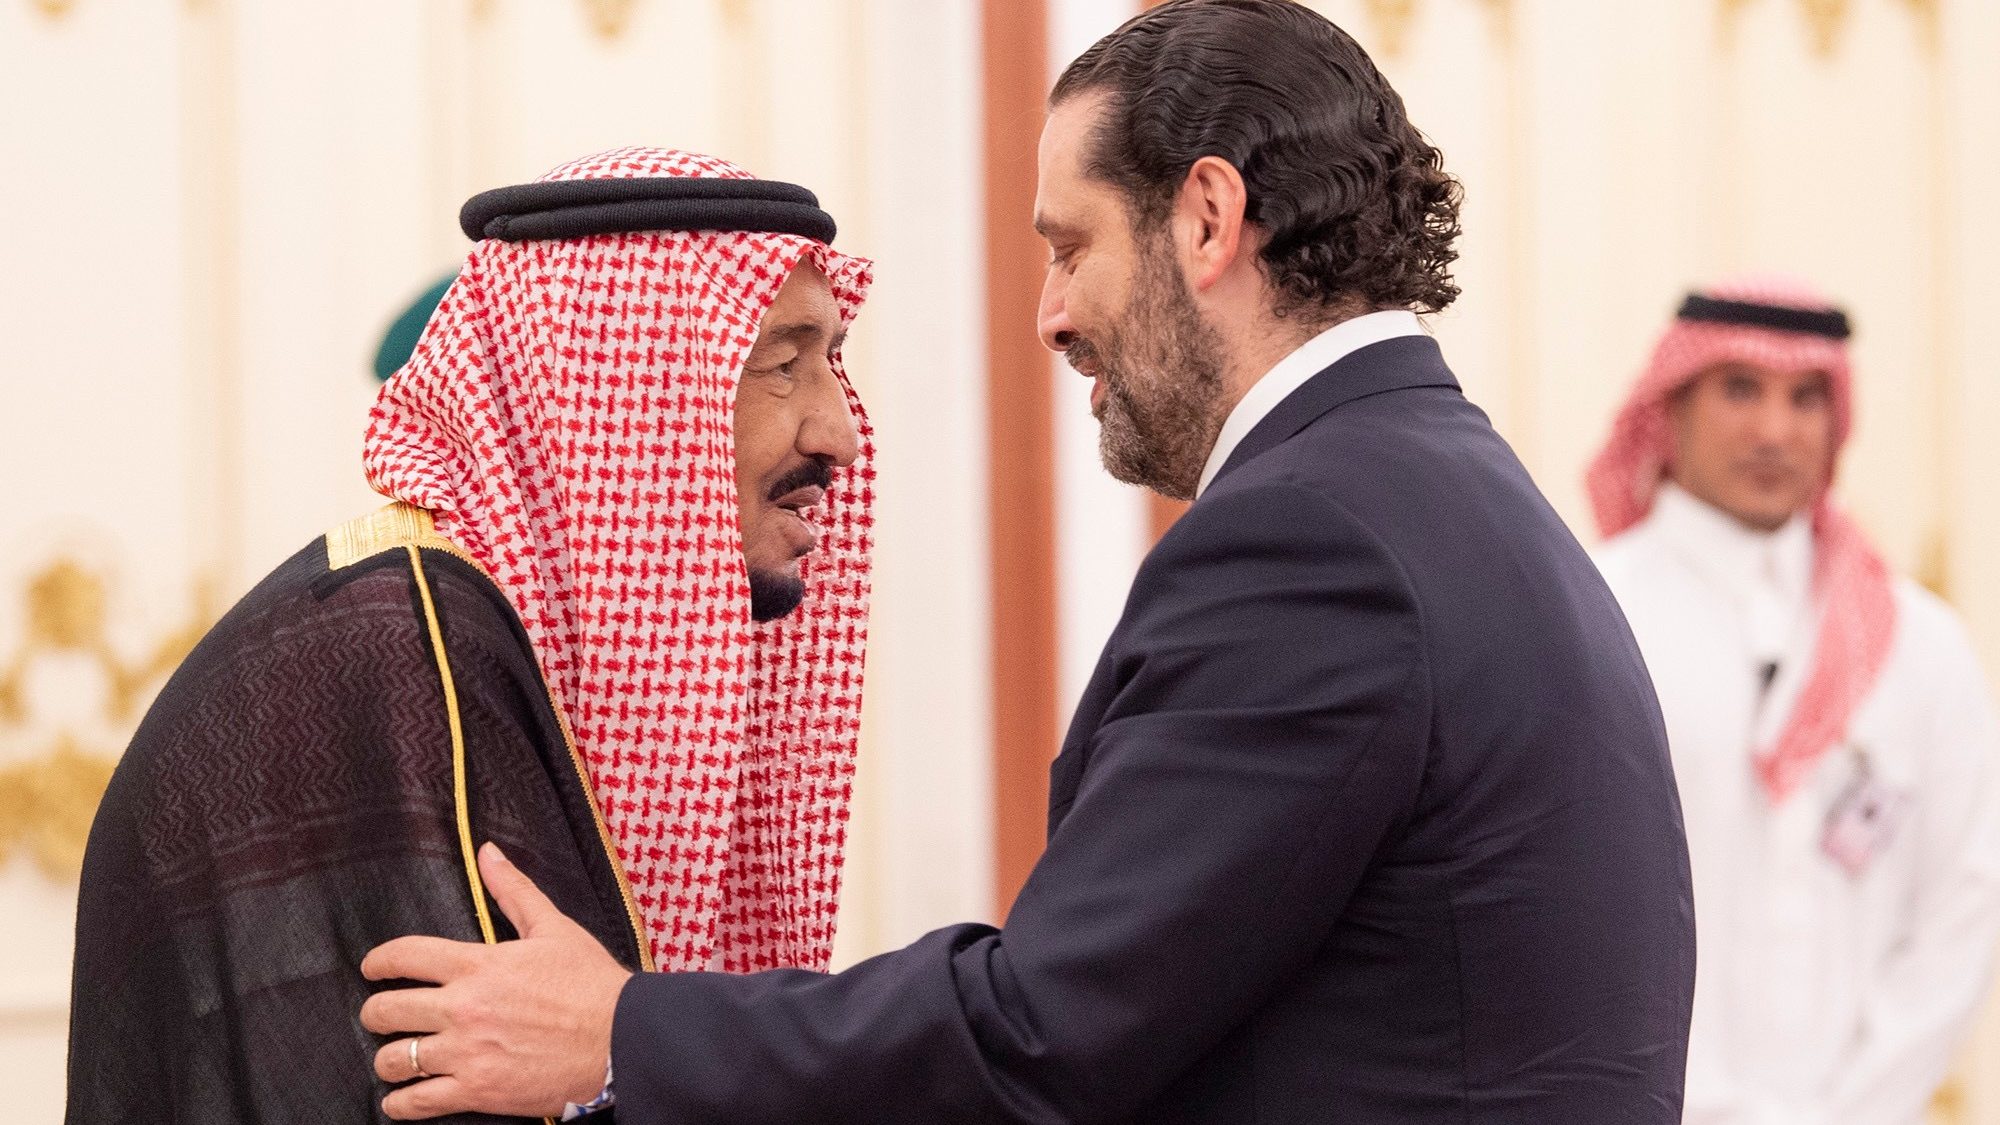 Saudi Arabia Offers Lebanon a Financial Hand, but Experts are Skeptical